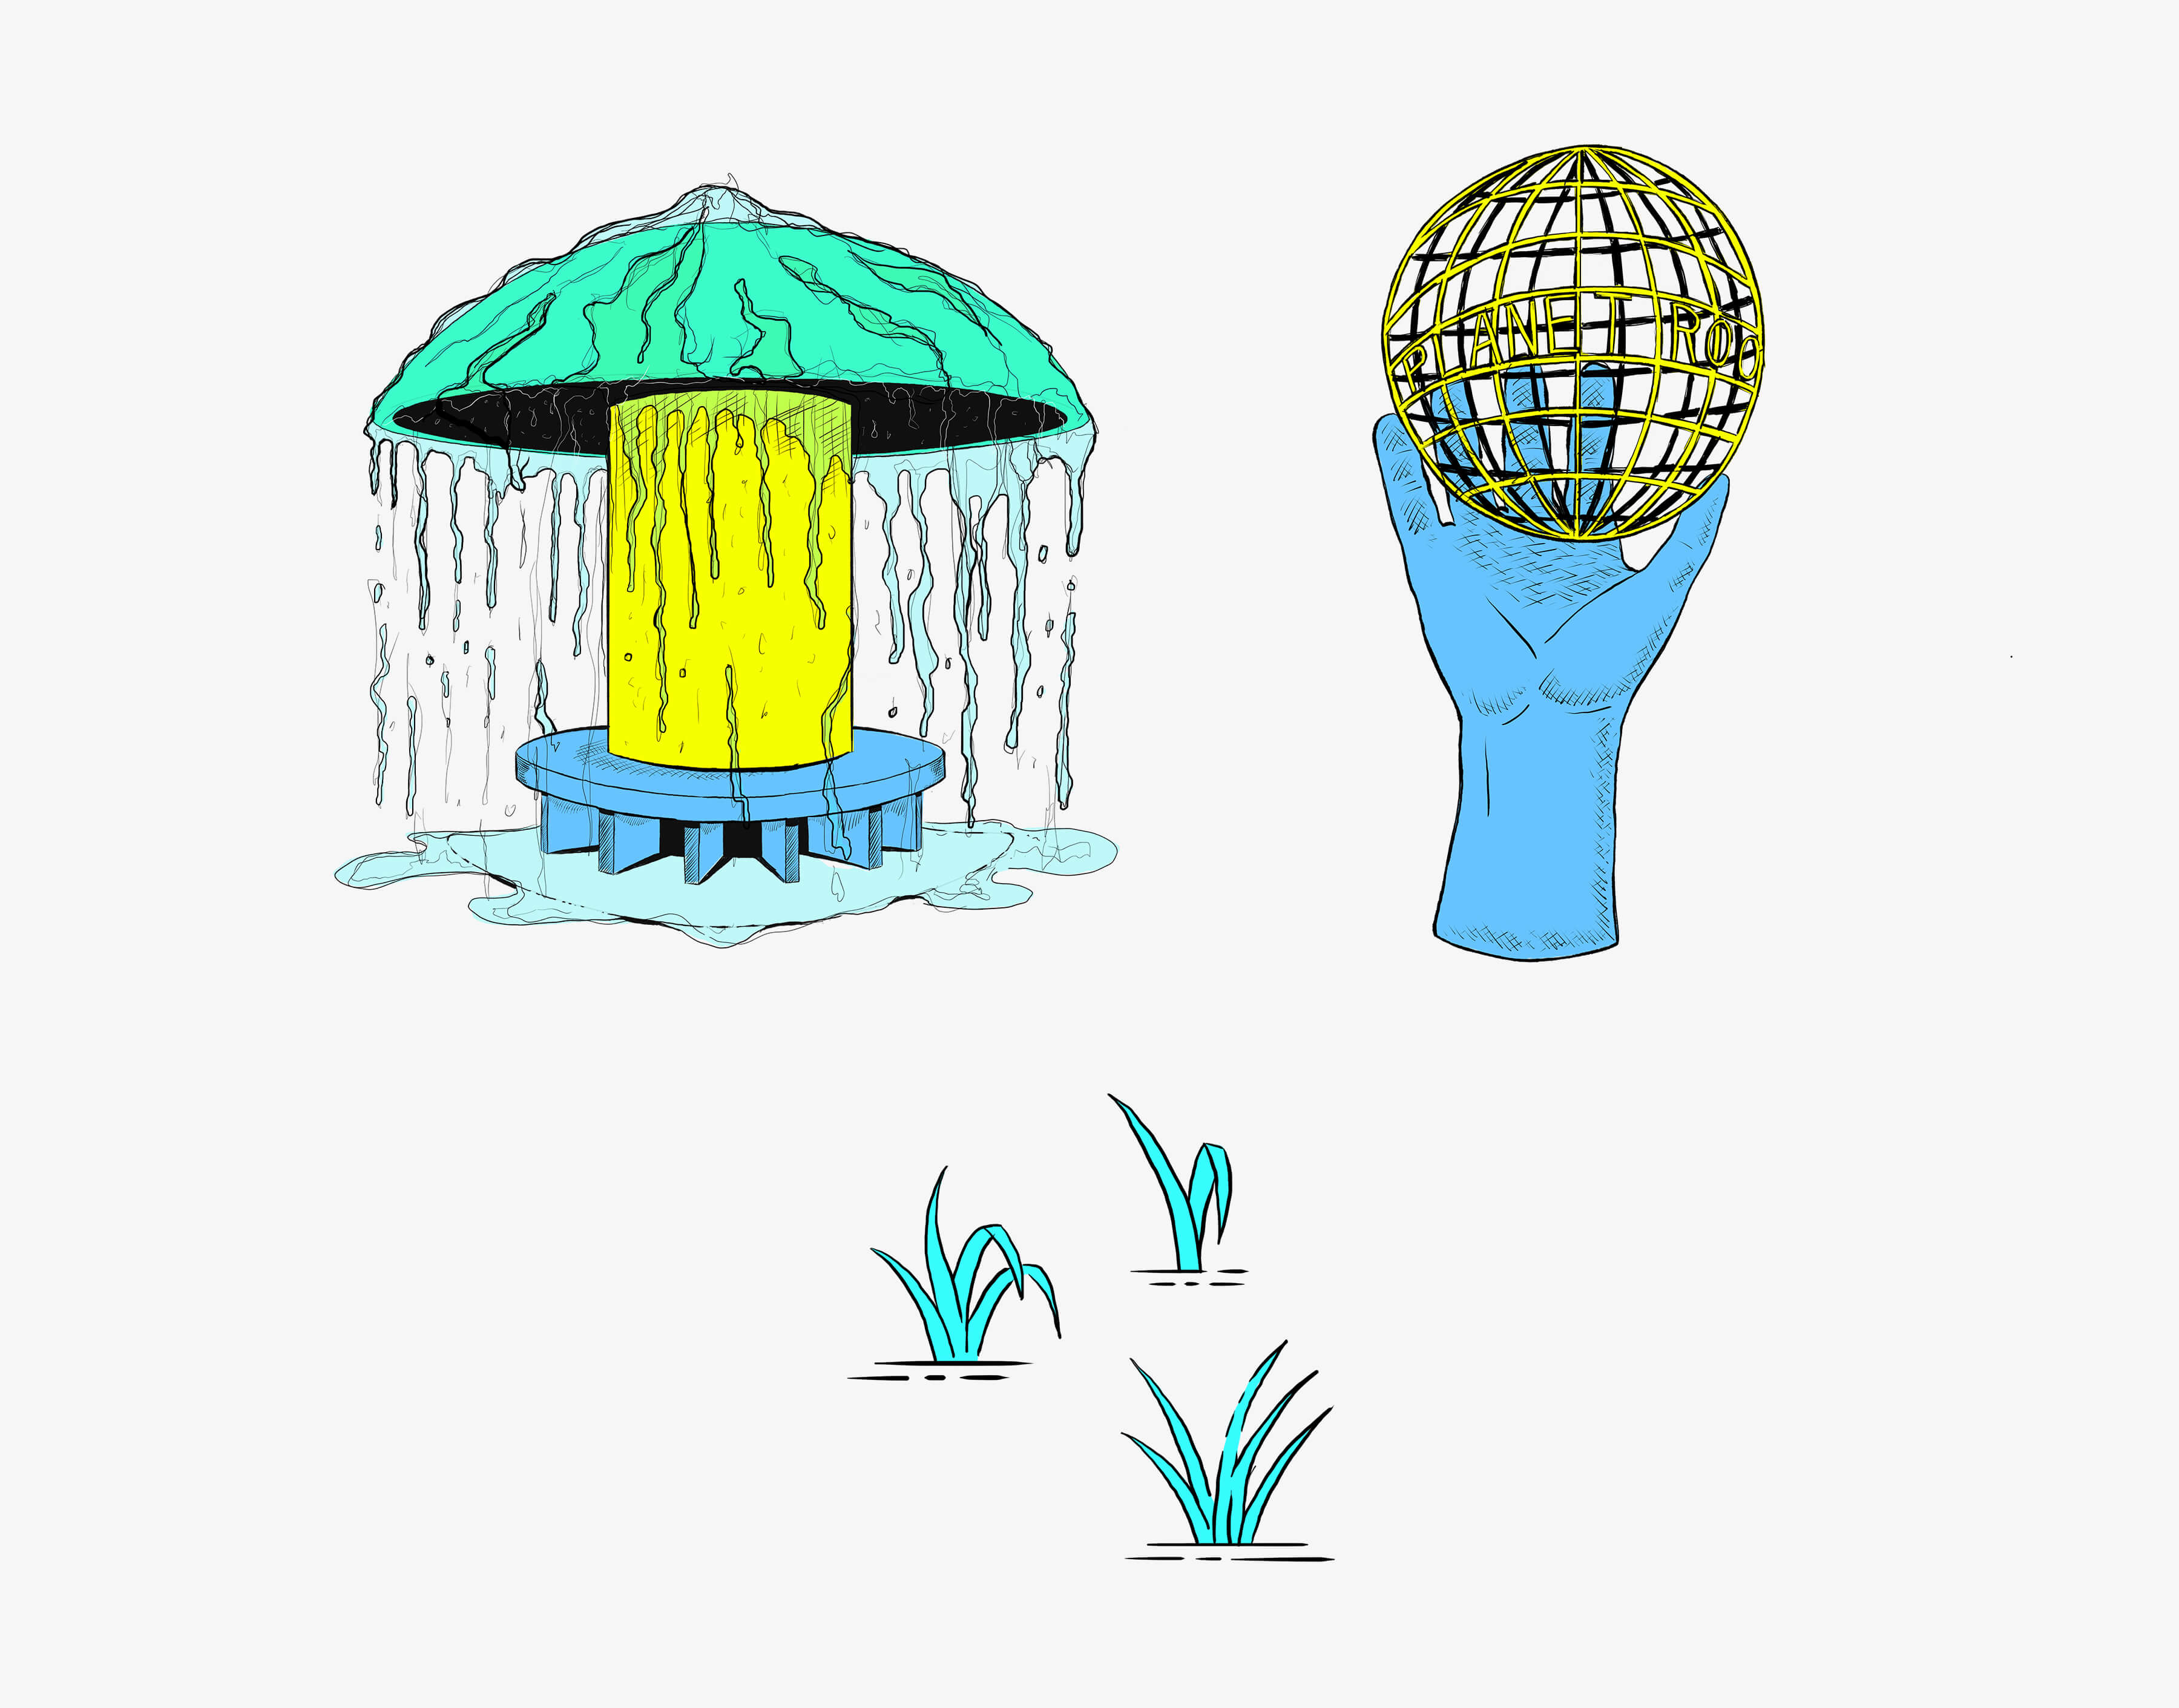 Illustrated Bonnaroo elements featuring the Fountain, the Planet Roo Hand, and grass.